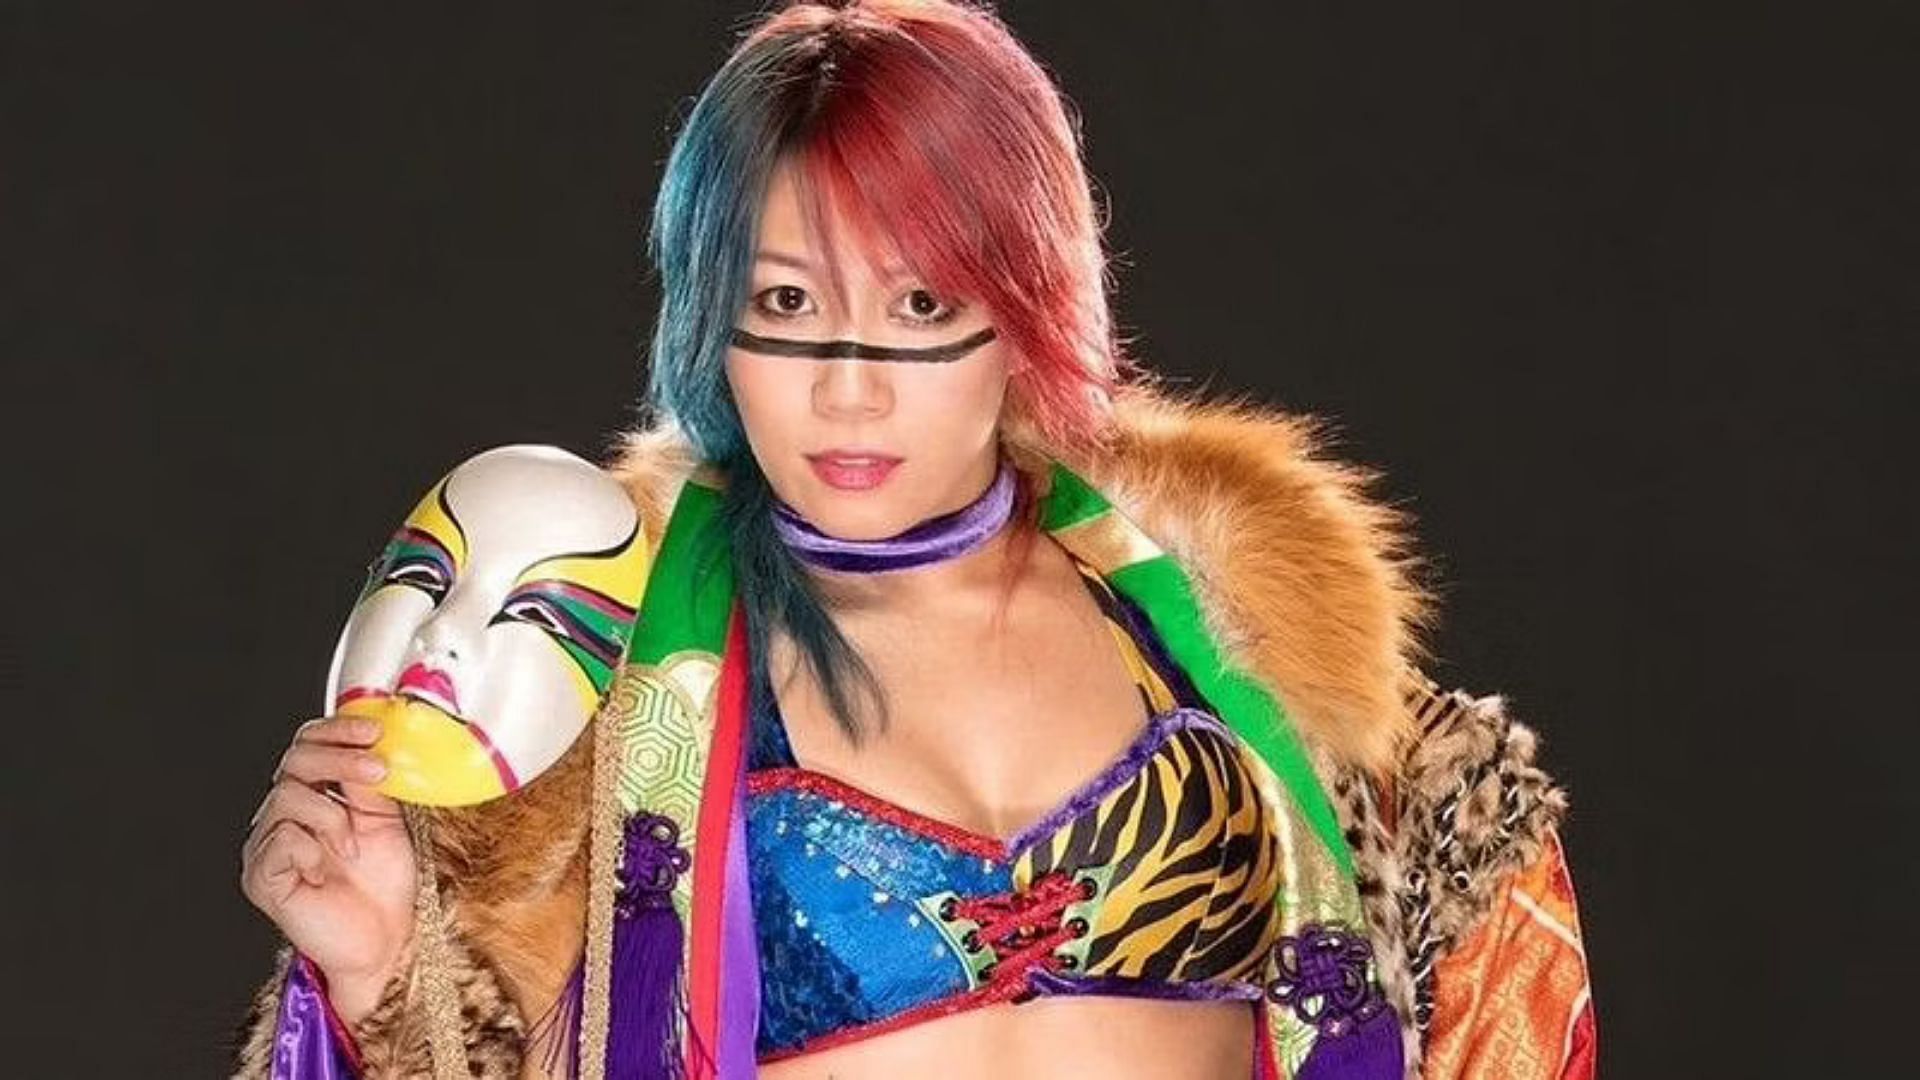 5 things you didn't know about Asuka